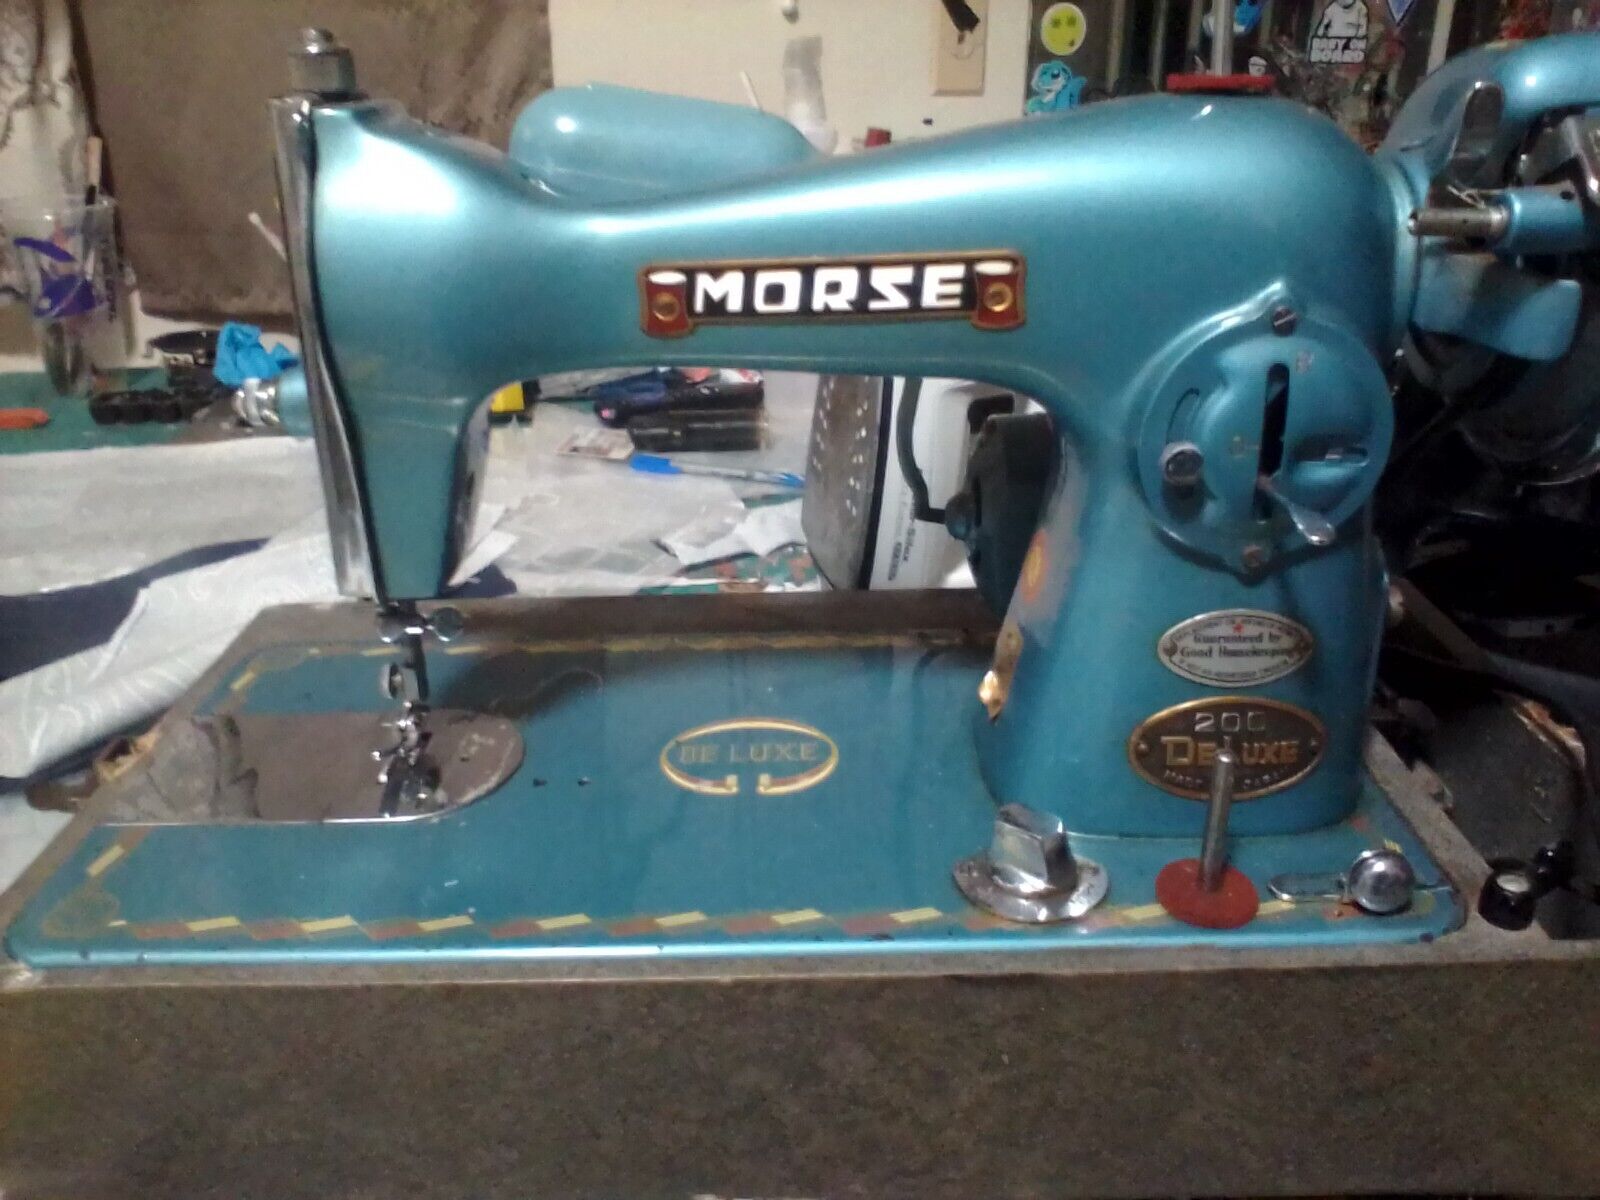 Vintage Morse Deluxe 200 Sewing Machine With Original Case